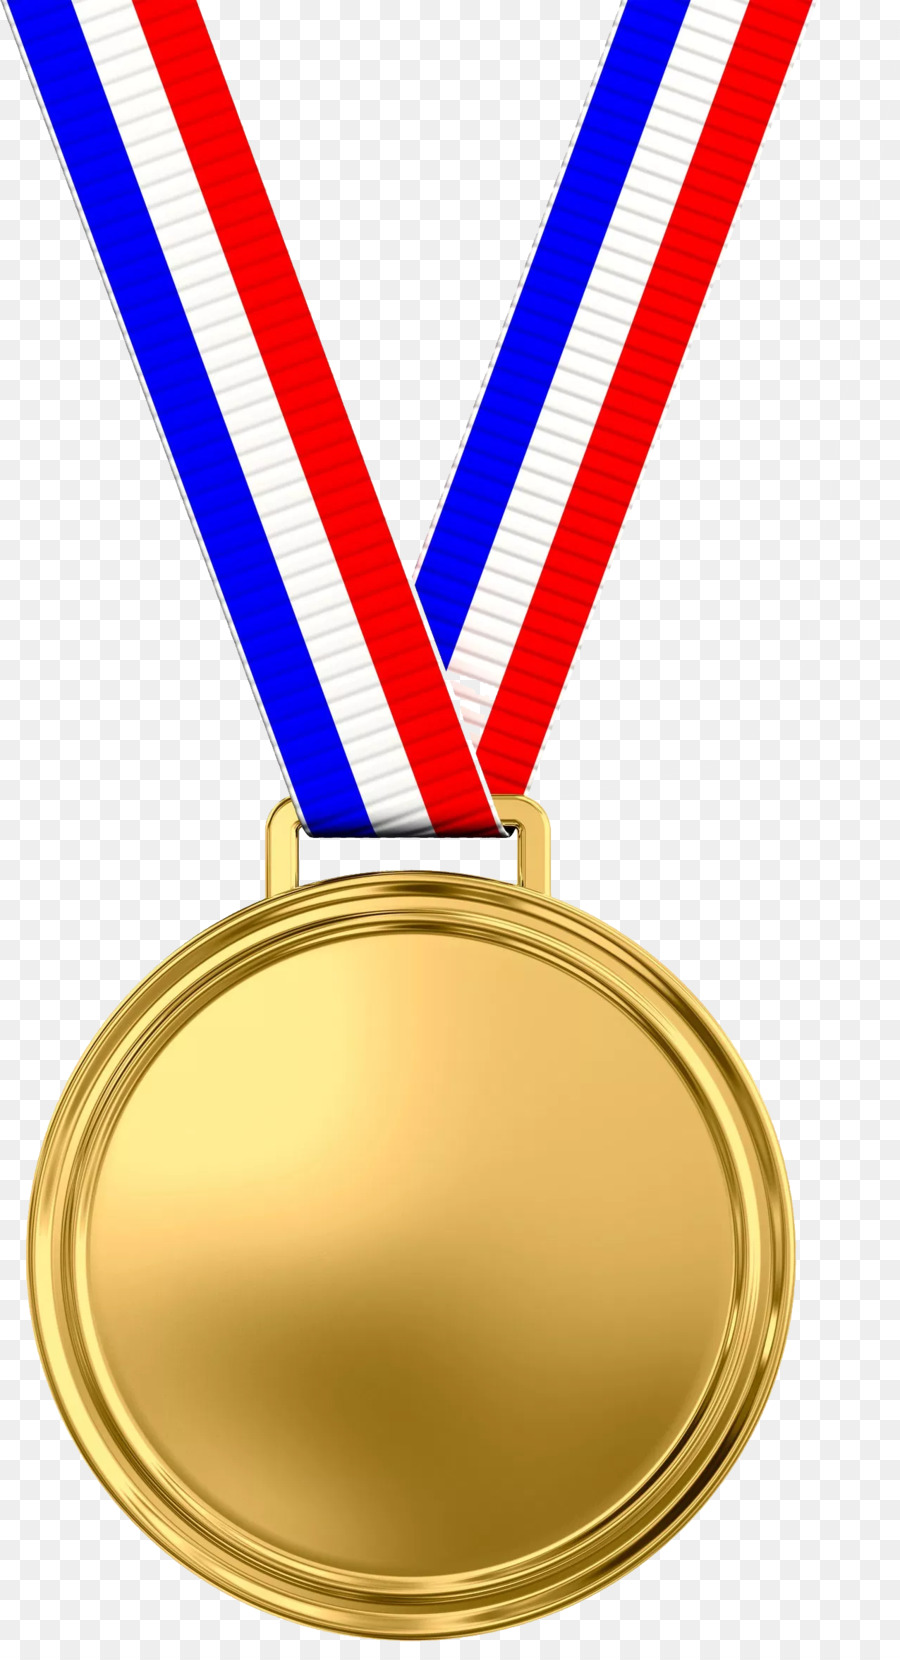 Gold Medal clipart.